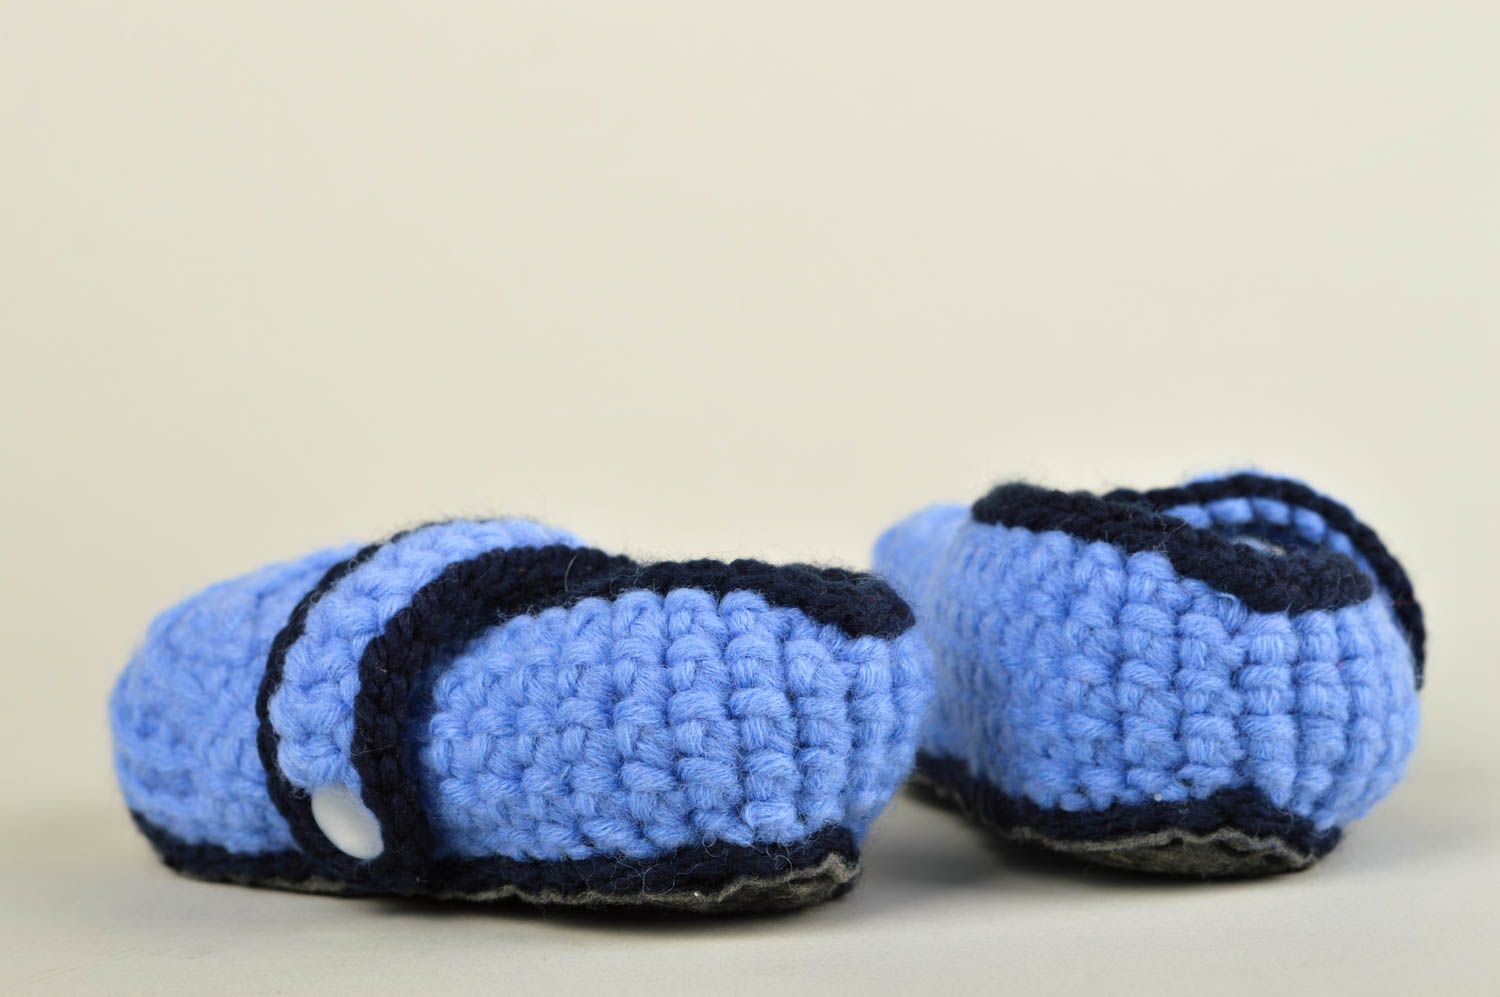 Handmade crocheted baby bootees designer blue baby bootees shoes for boys photo 4